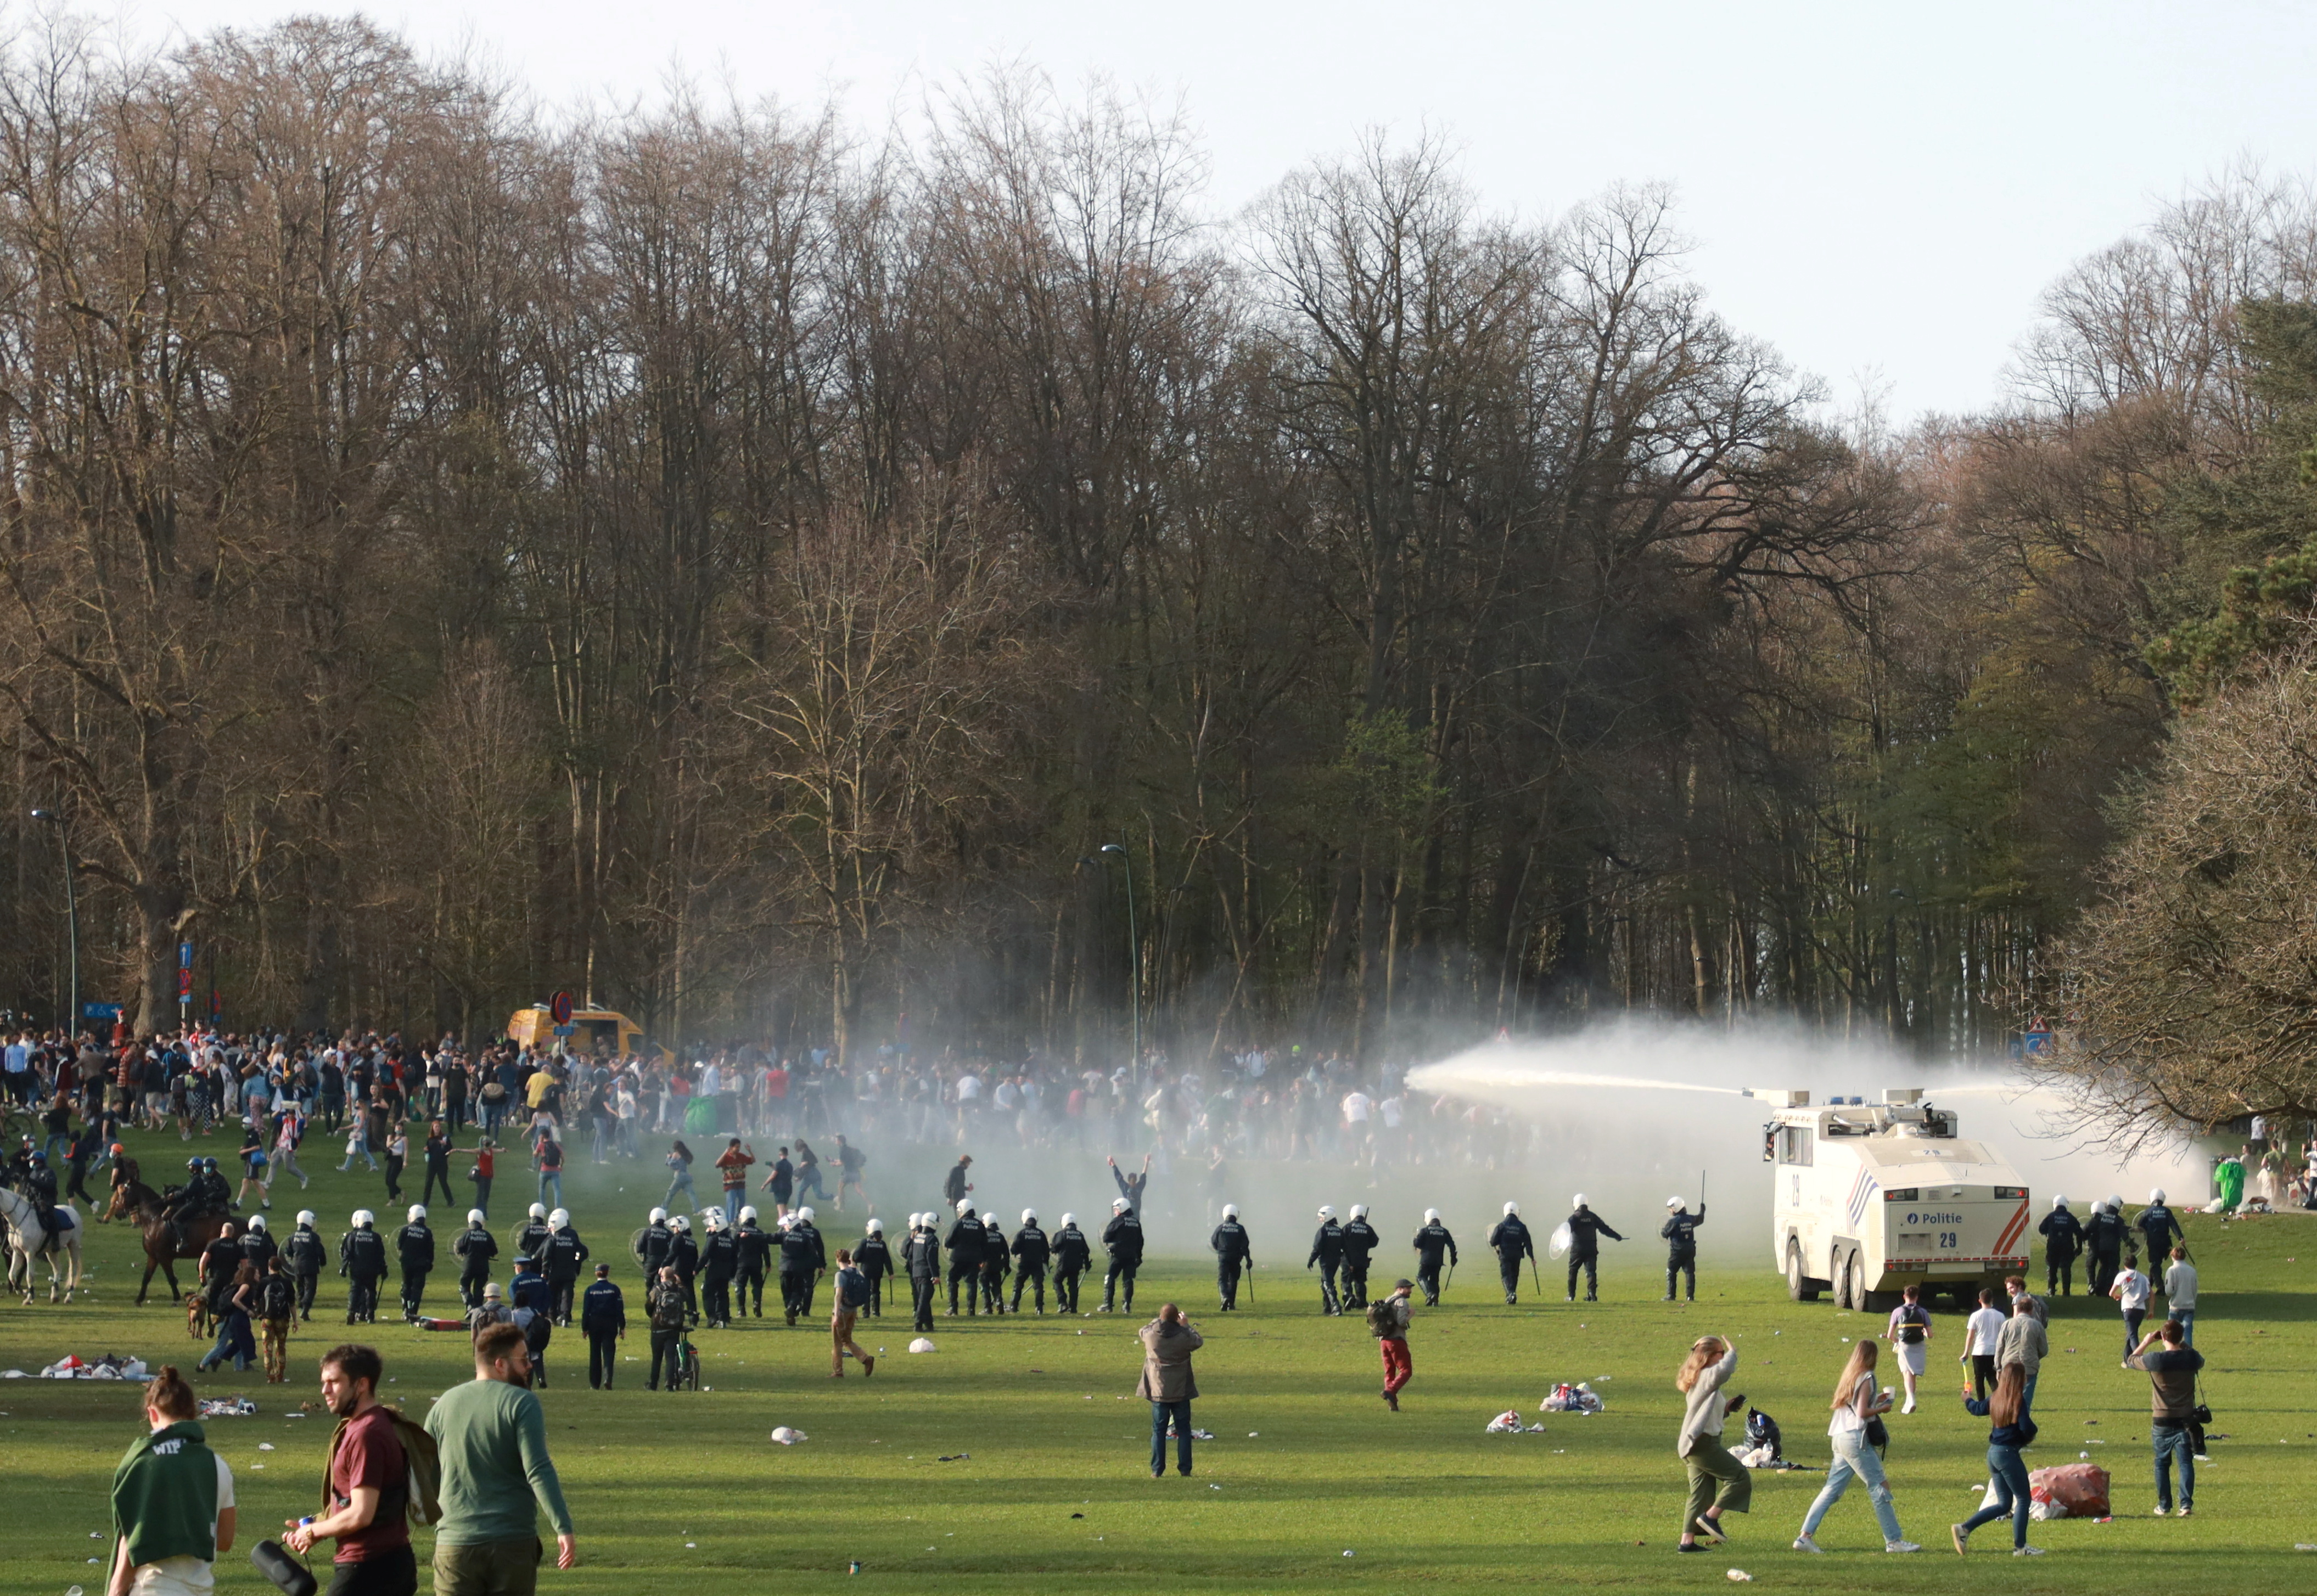 Police disperse young people at Belgian April Fool party